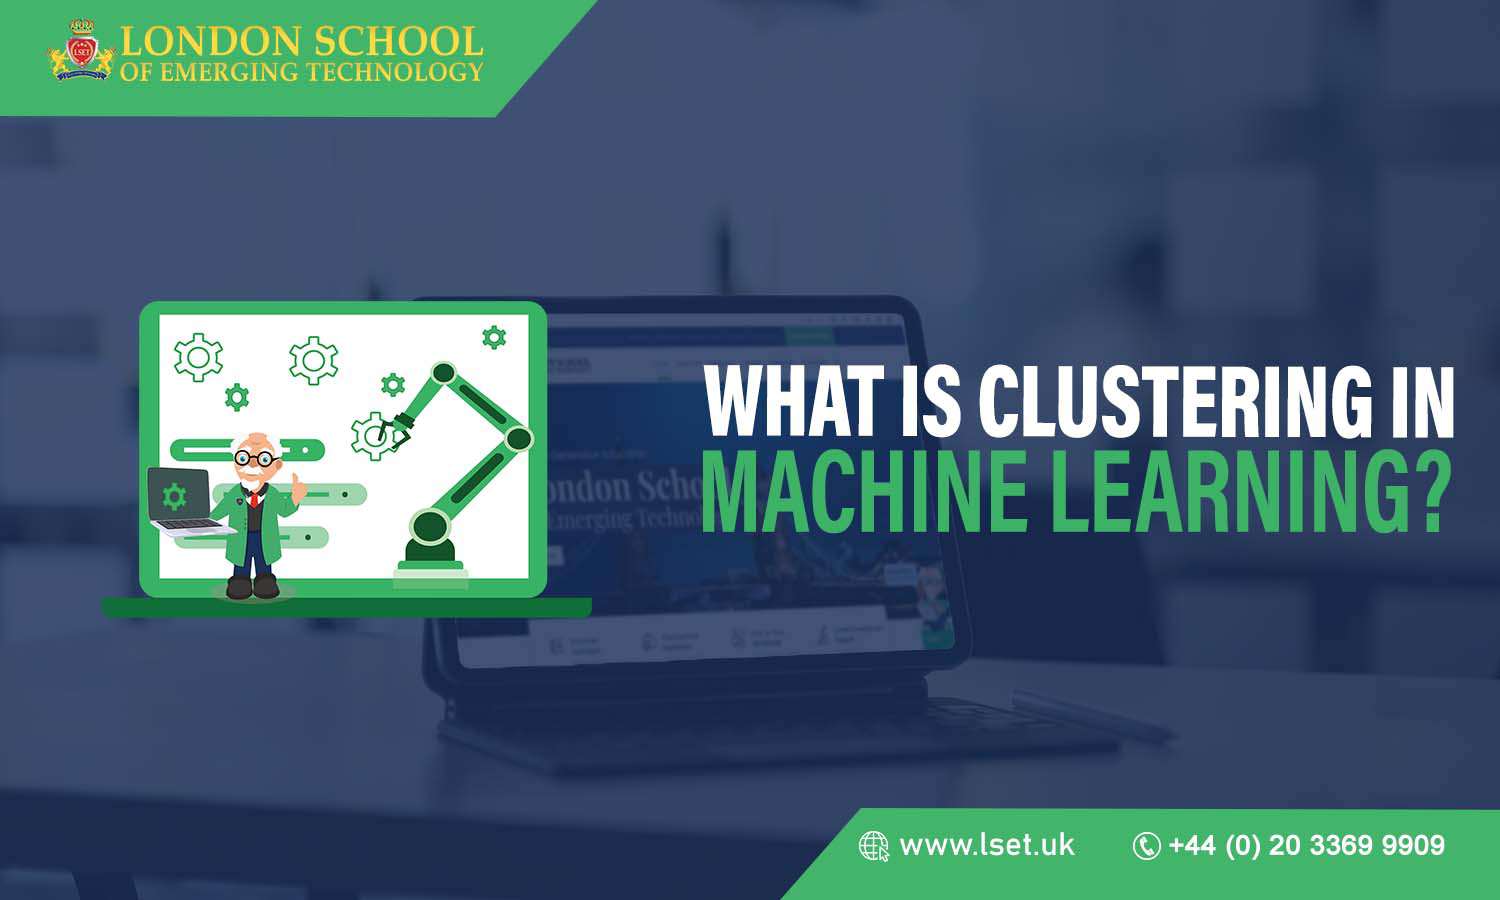 What is Clustering in Machine Learning